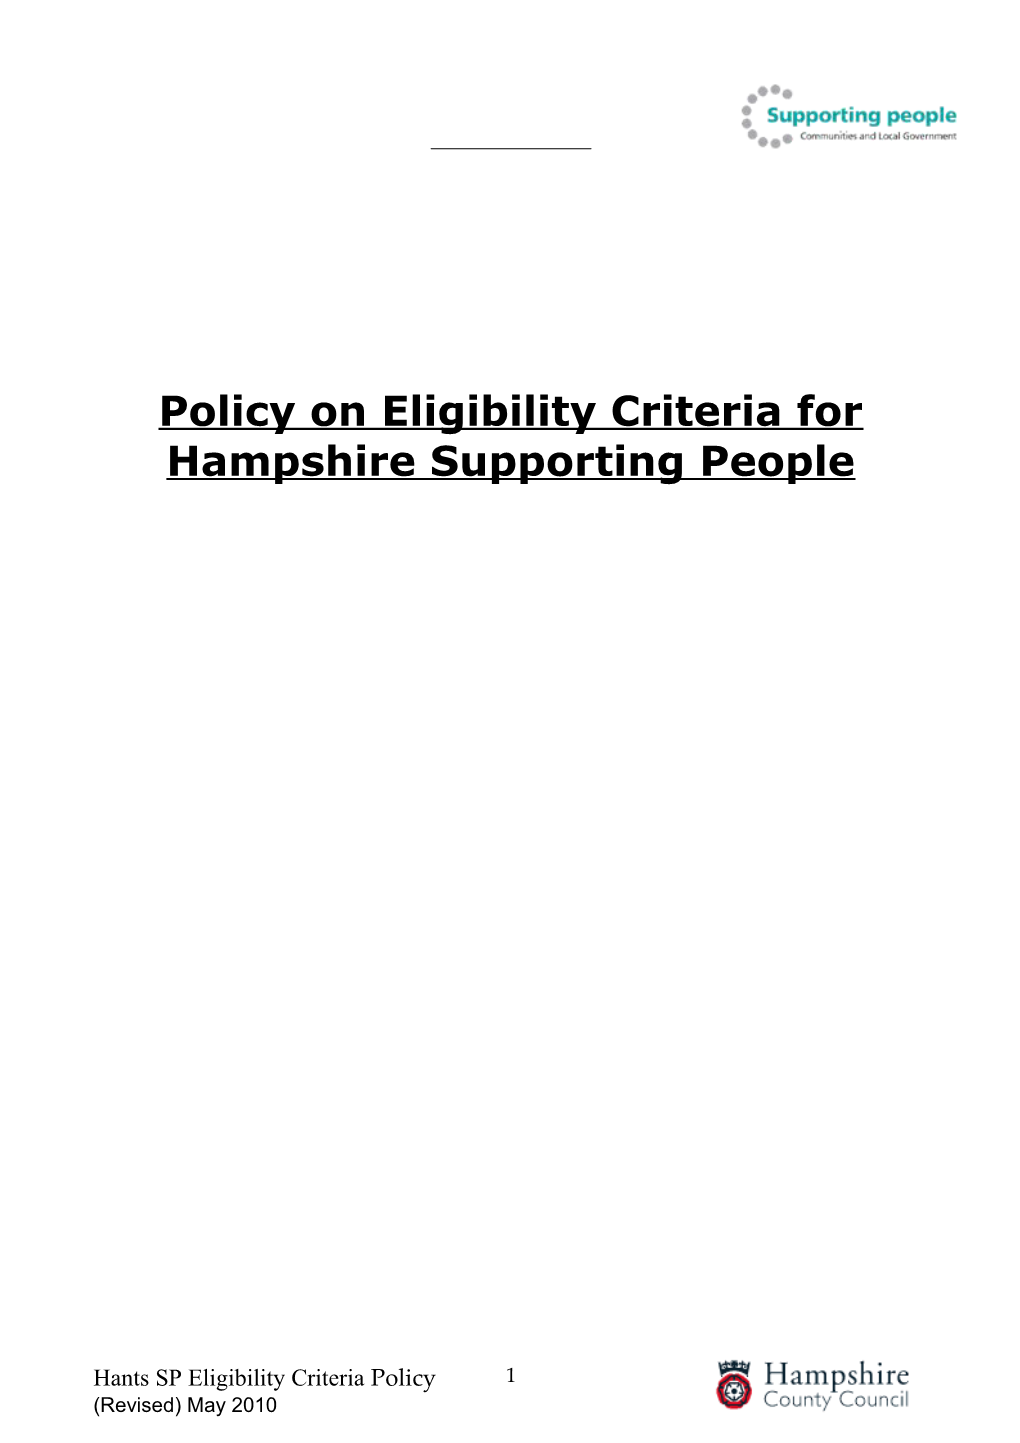 Policy on Eligibility Criteria for Hampshire Supporting People